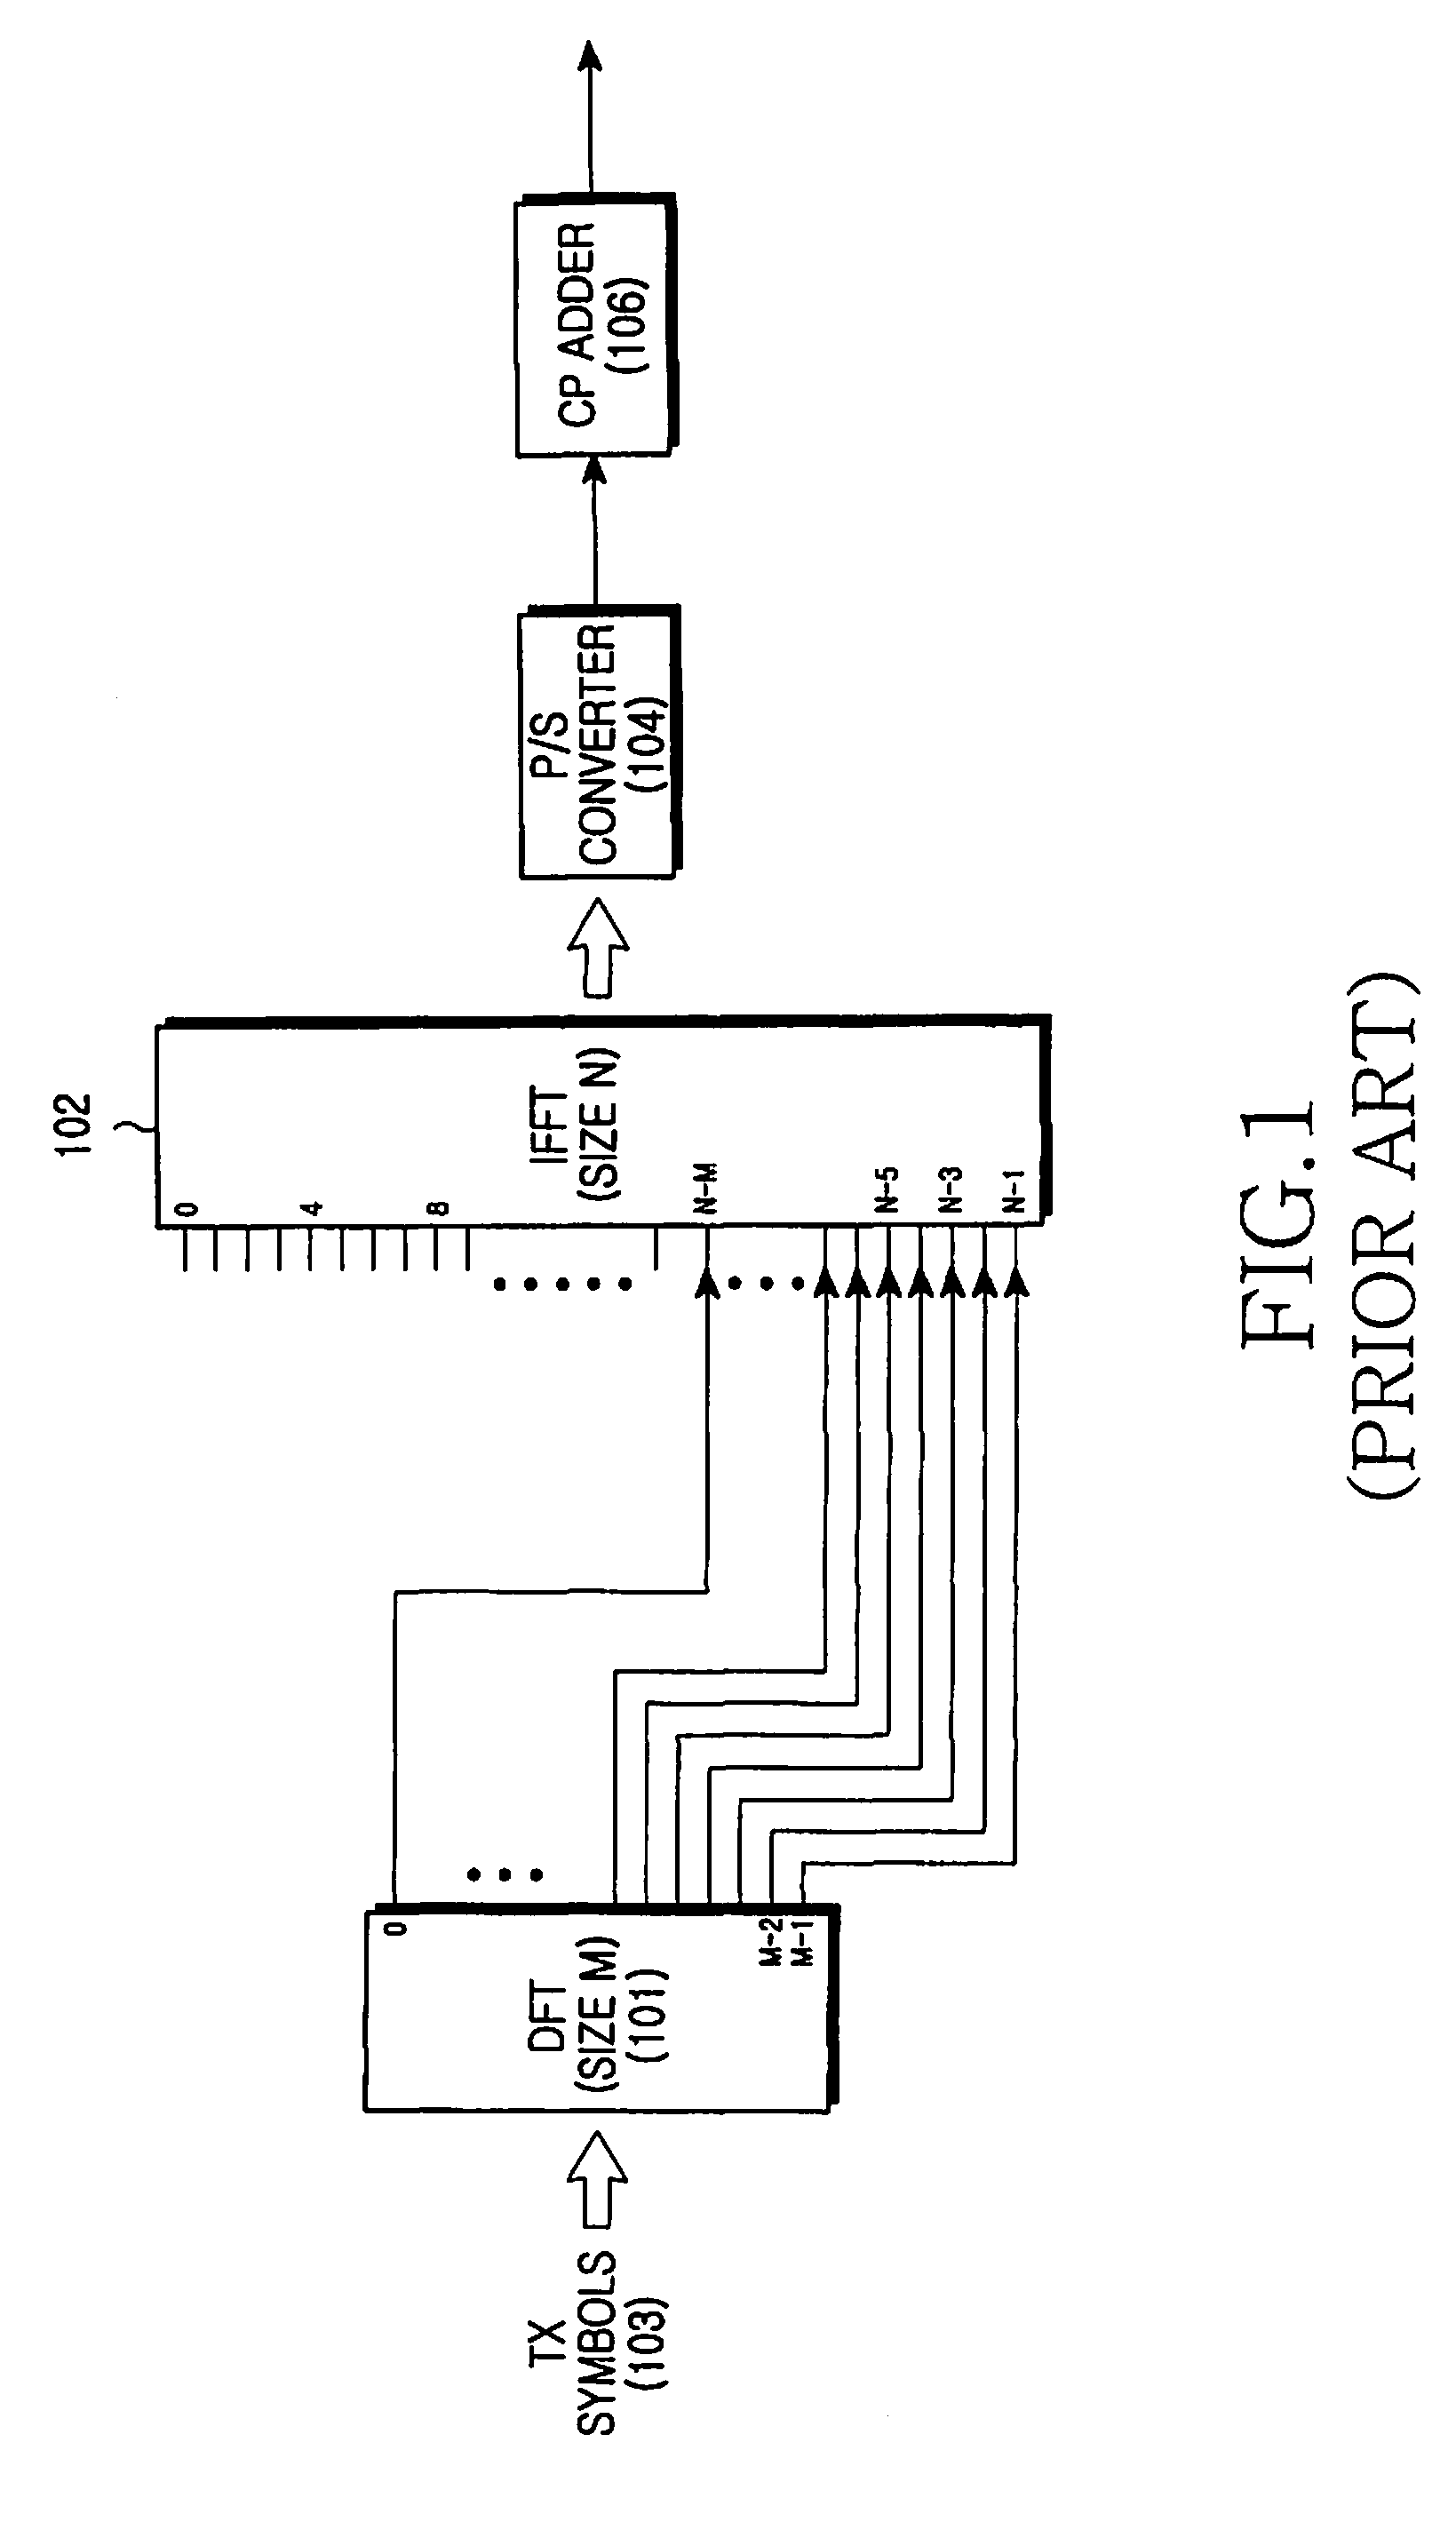 Method and apparatus for transmitting/receiving data and control information through an uplink in a wireless communication system